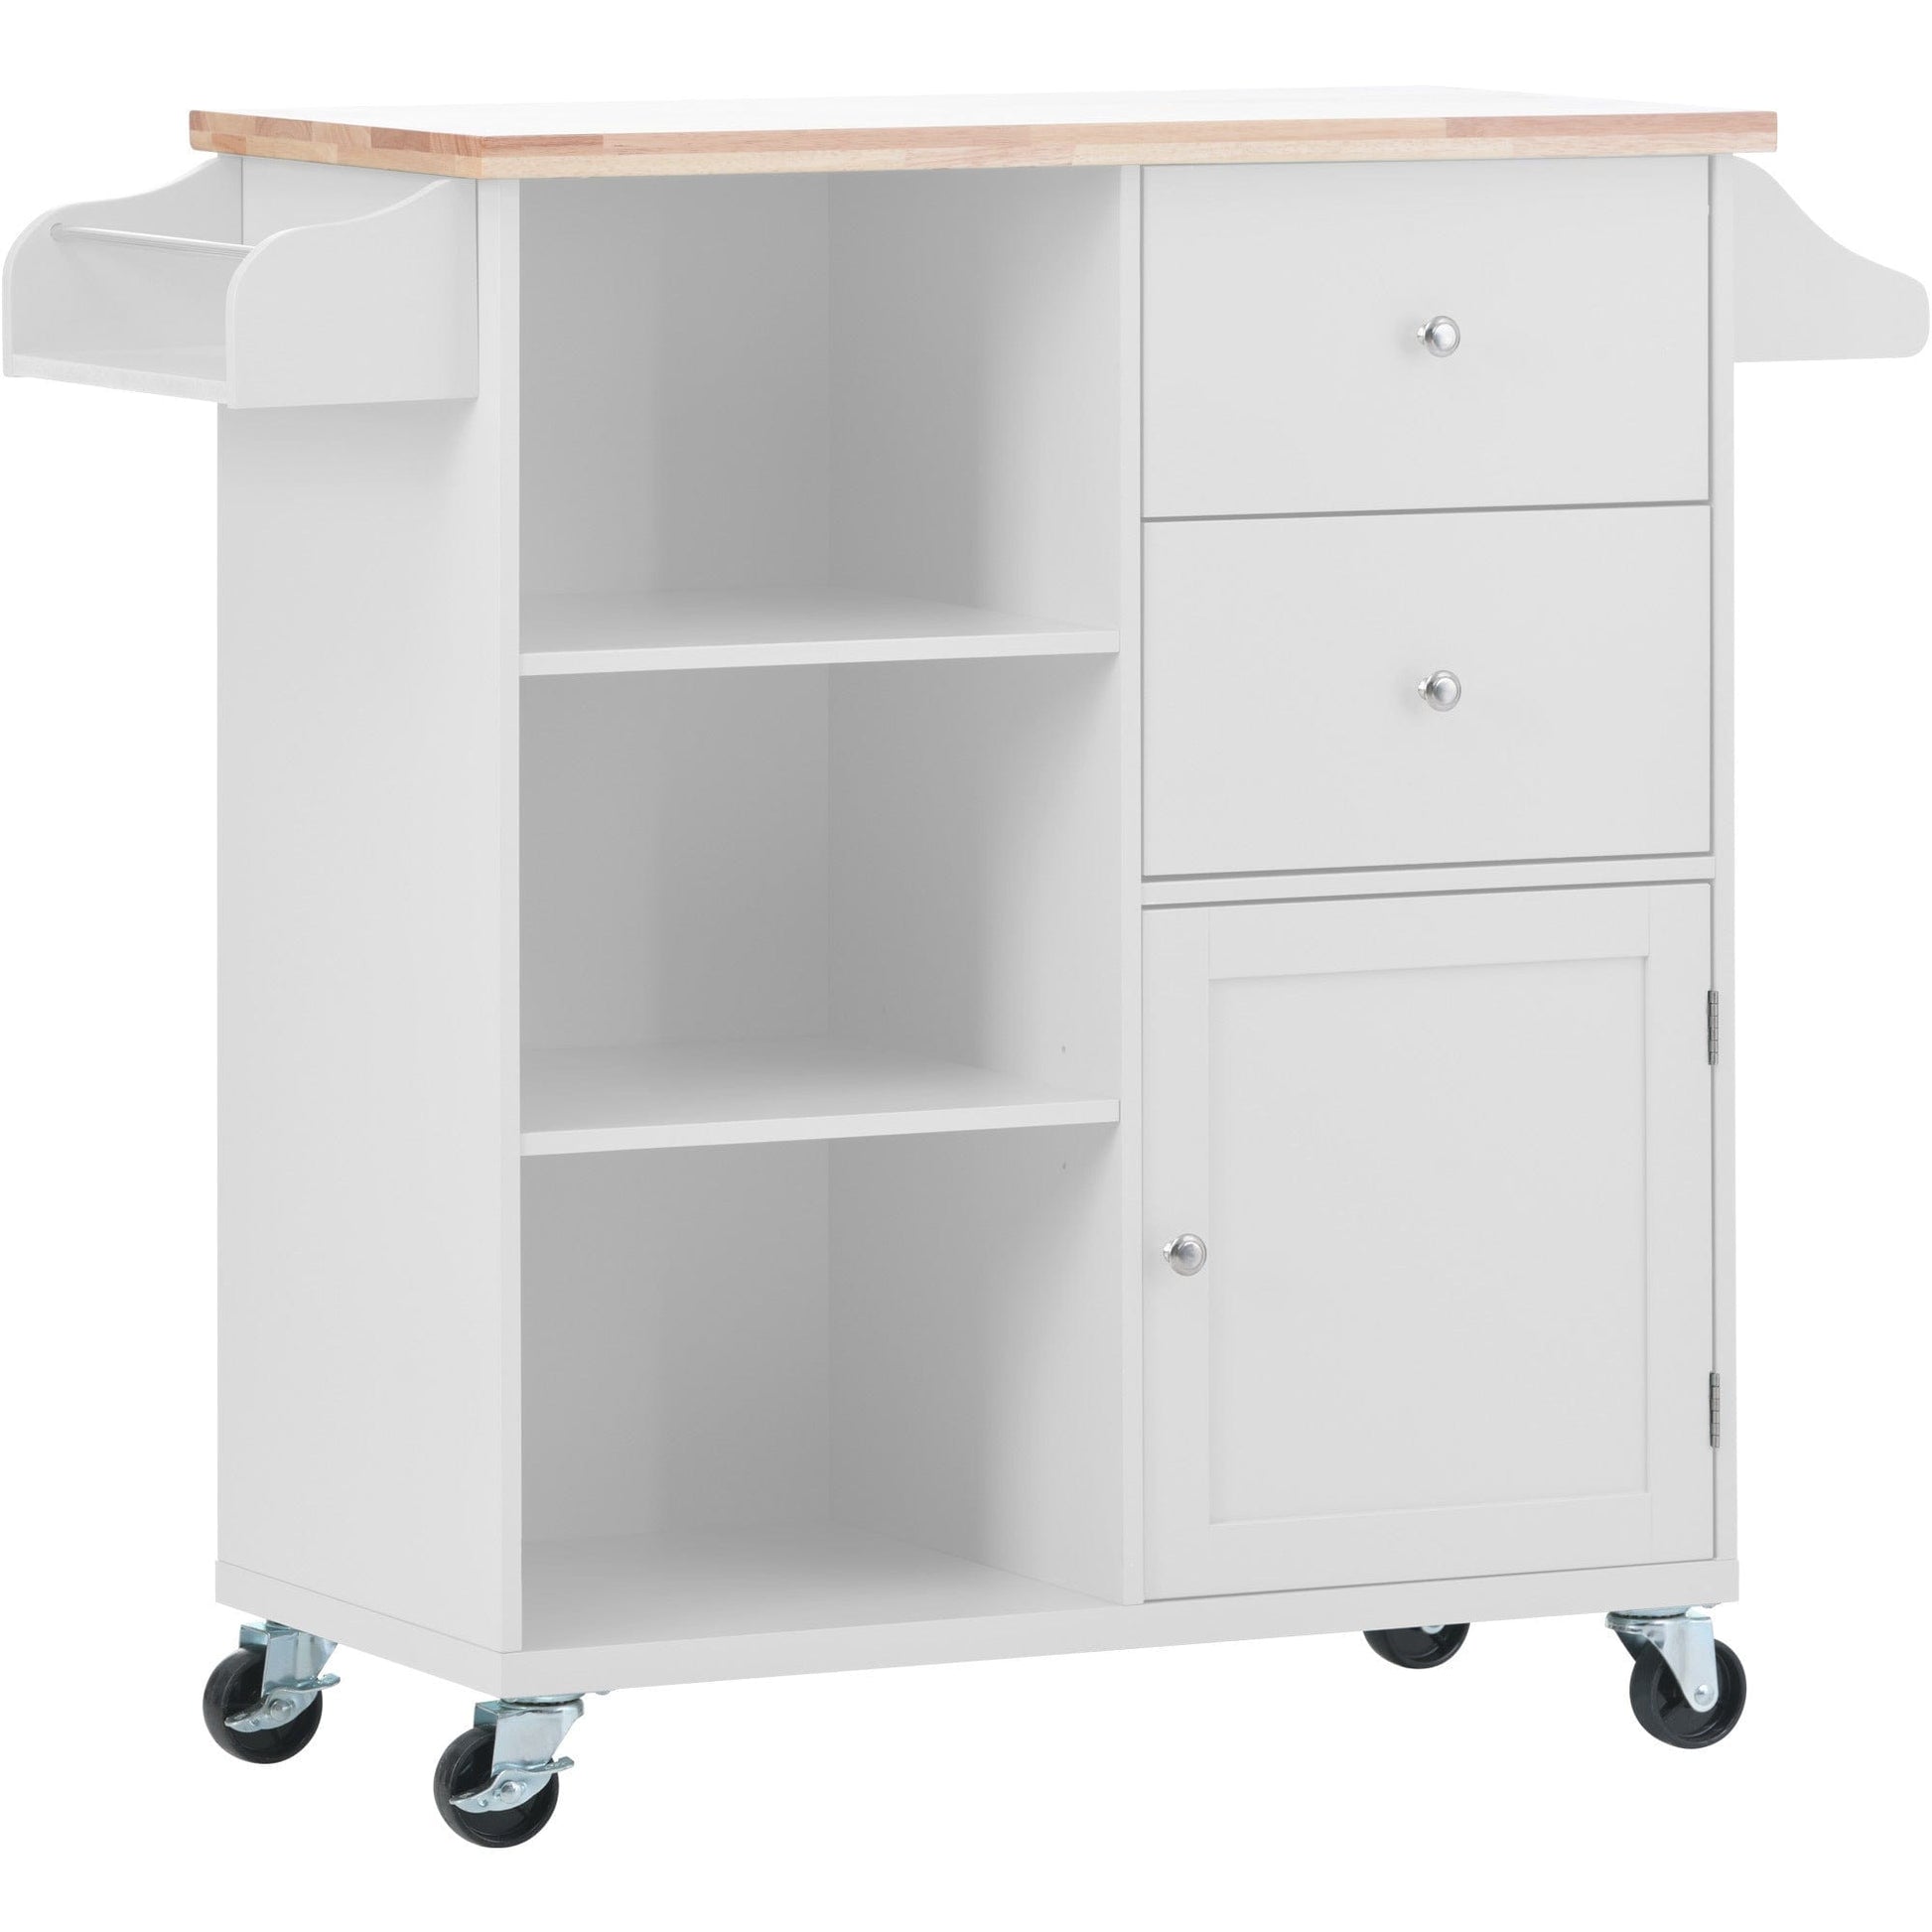 1st Choice Furniture Direct Kitchen Cart 1st Choice 4 Wheels Dining Room Kitchen Cart with Drawers & Shelves